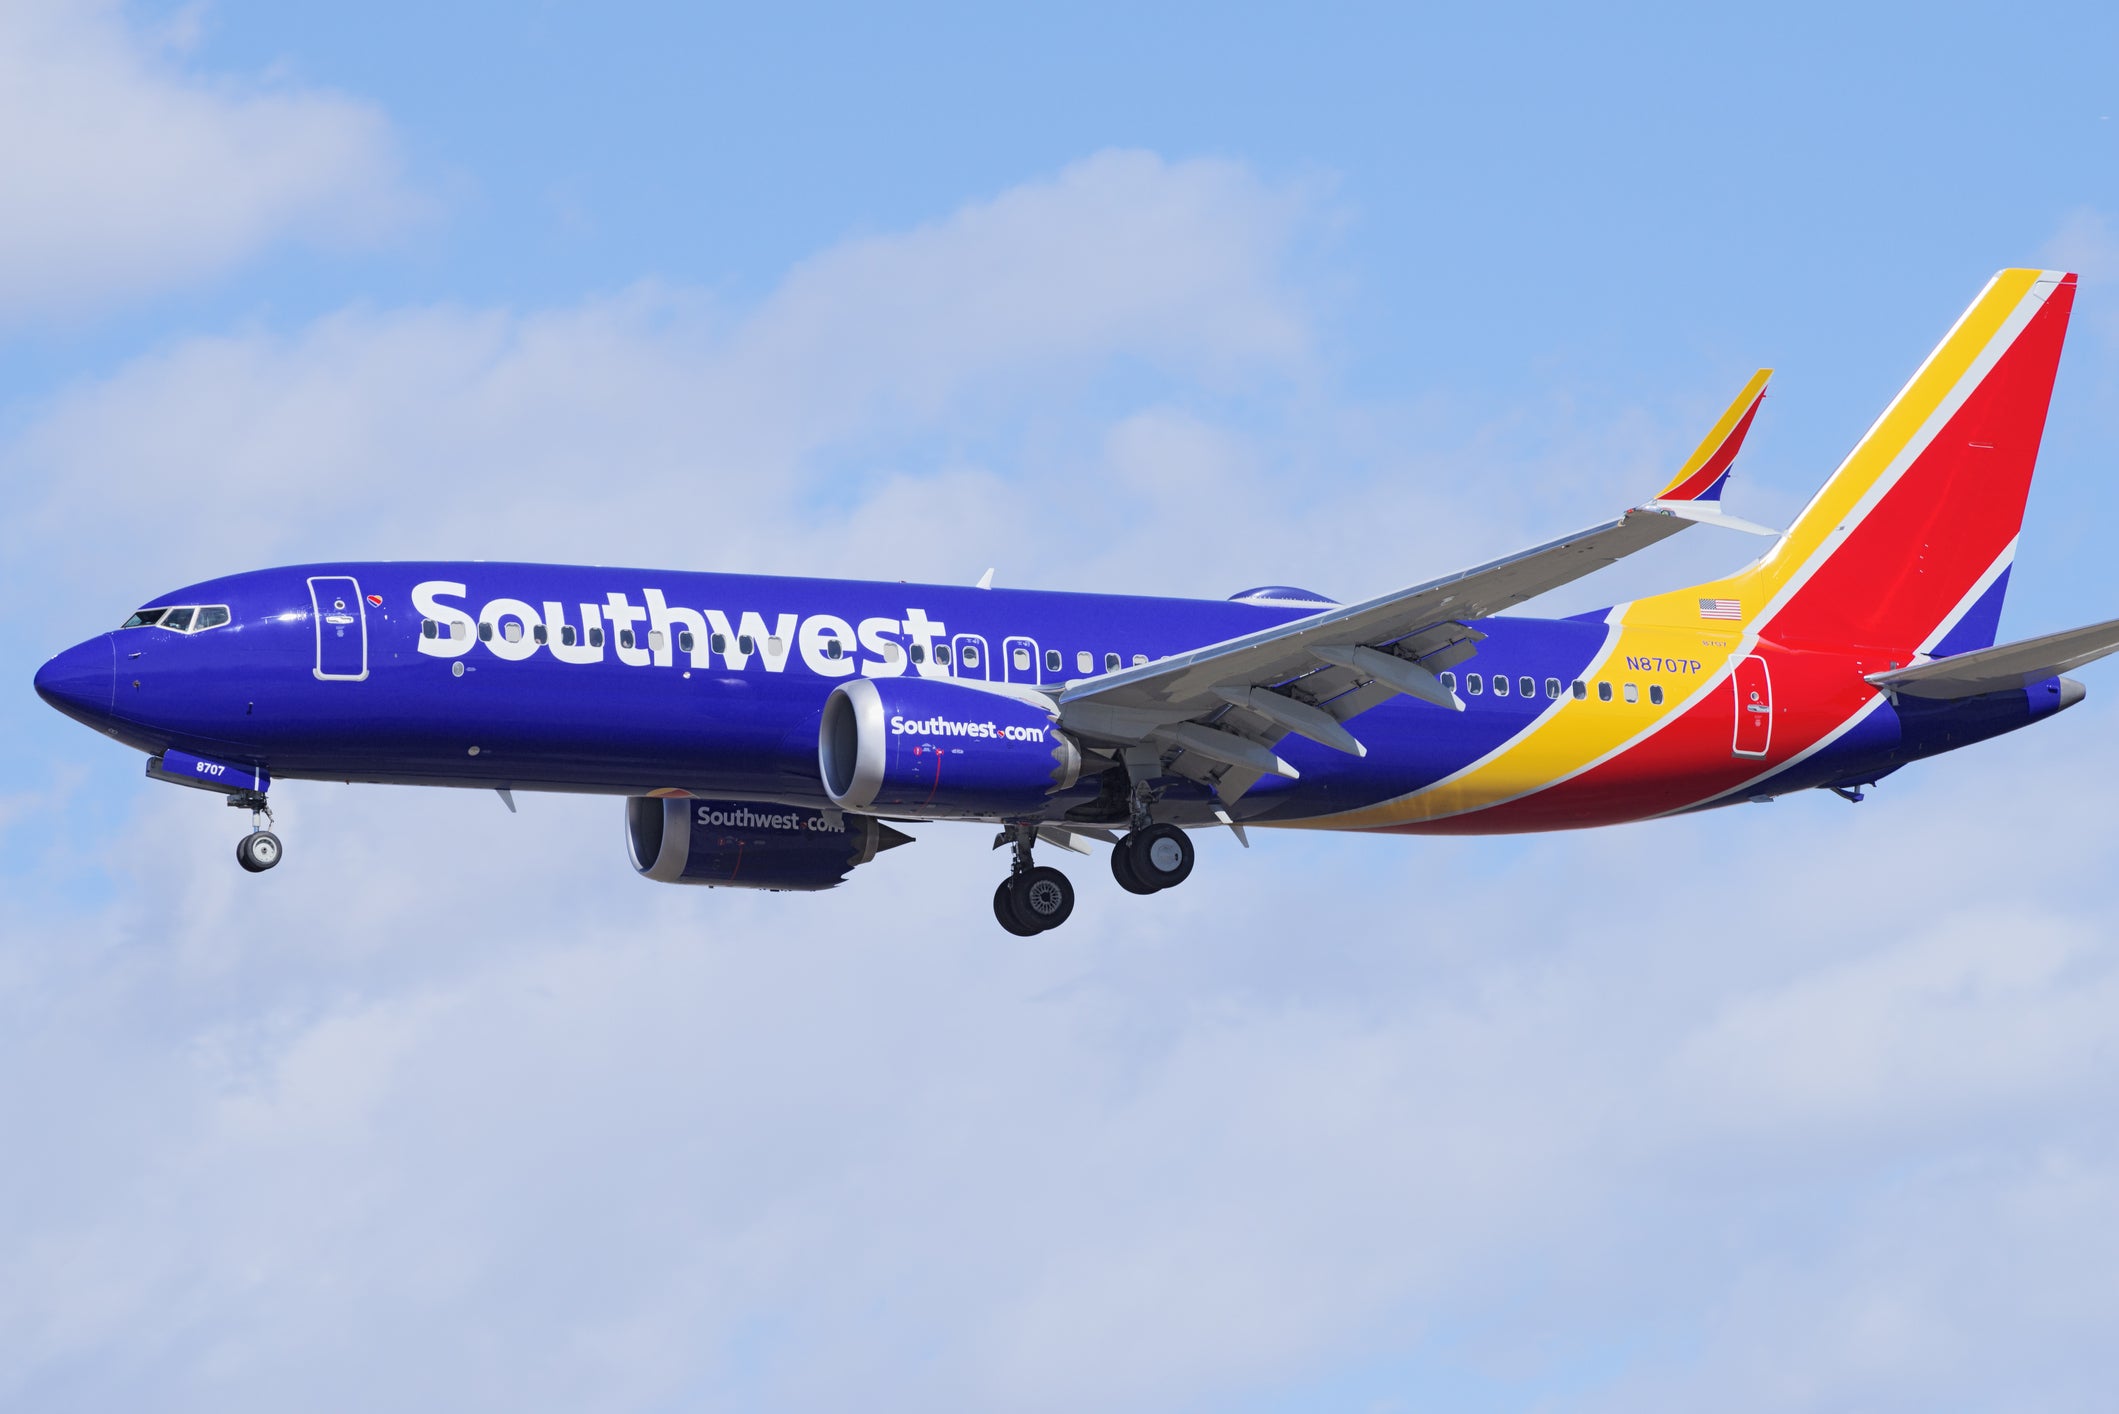 Southwest Airlines was upholding a federal mask mandate